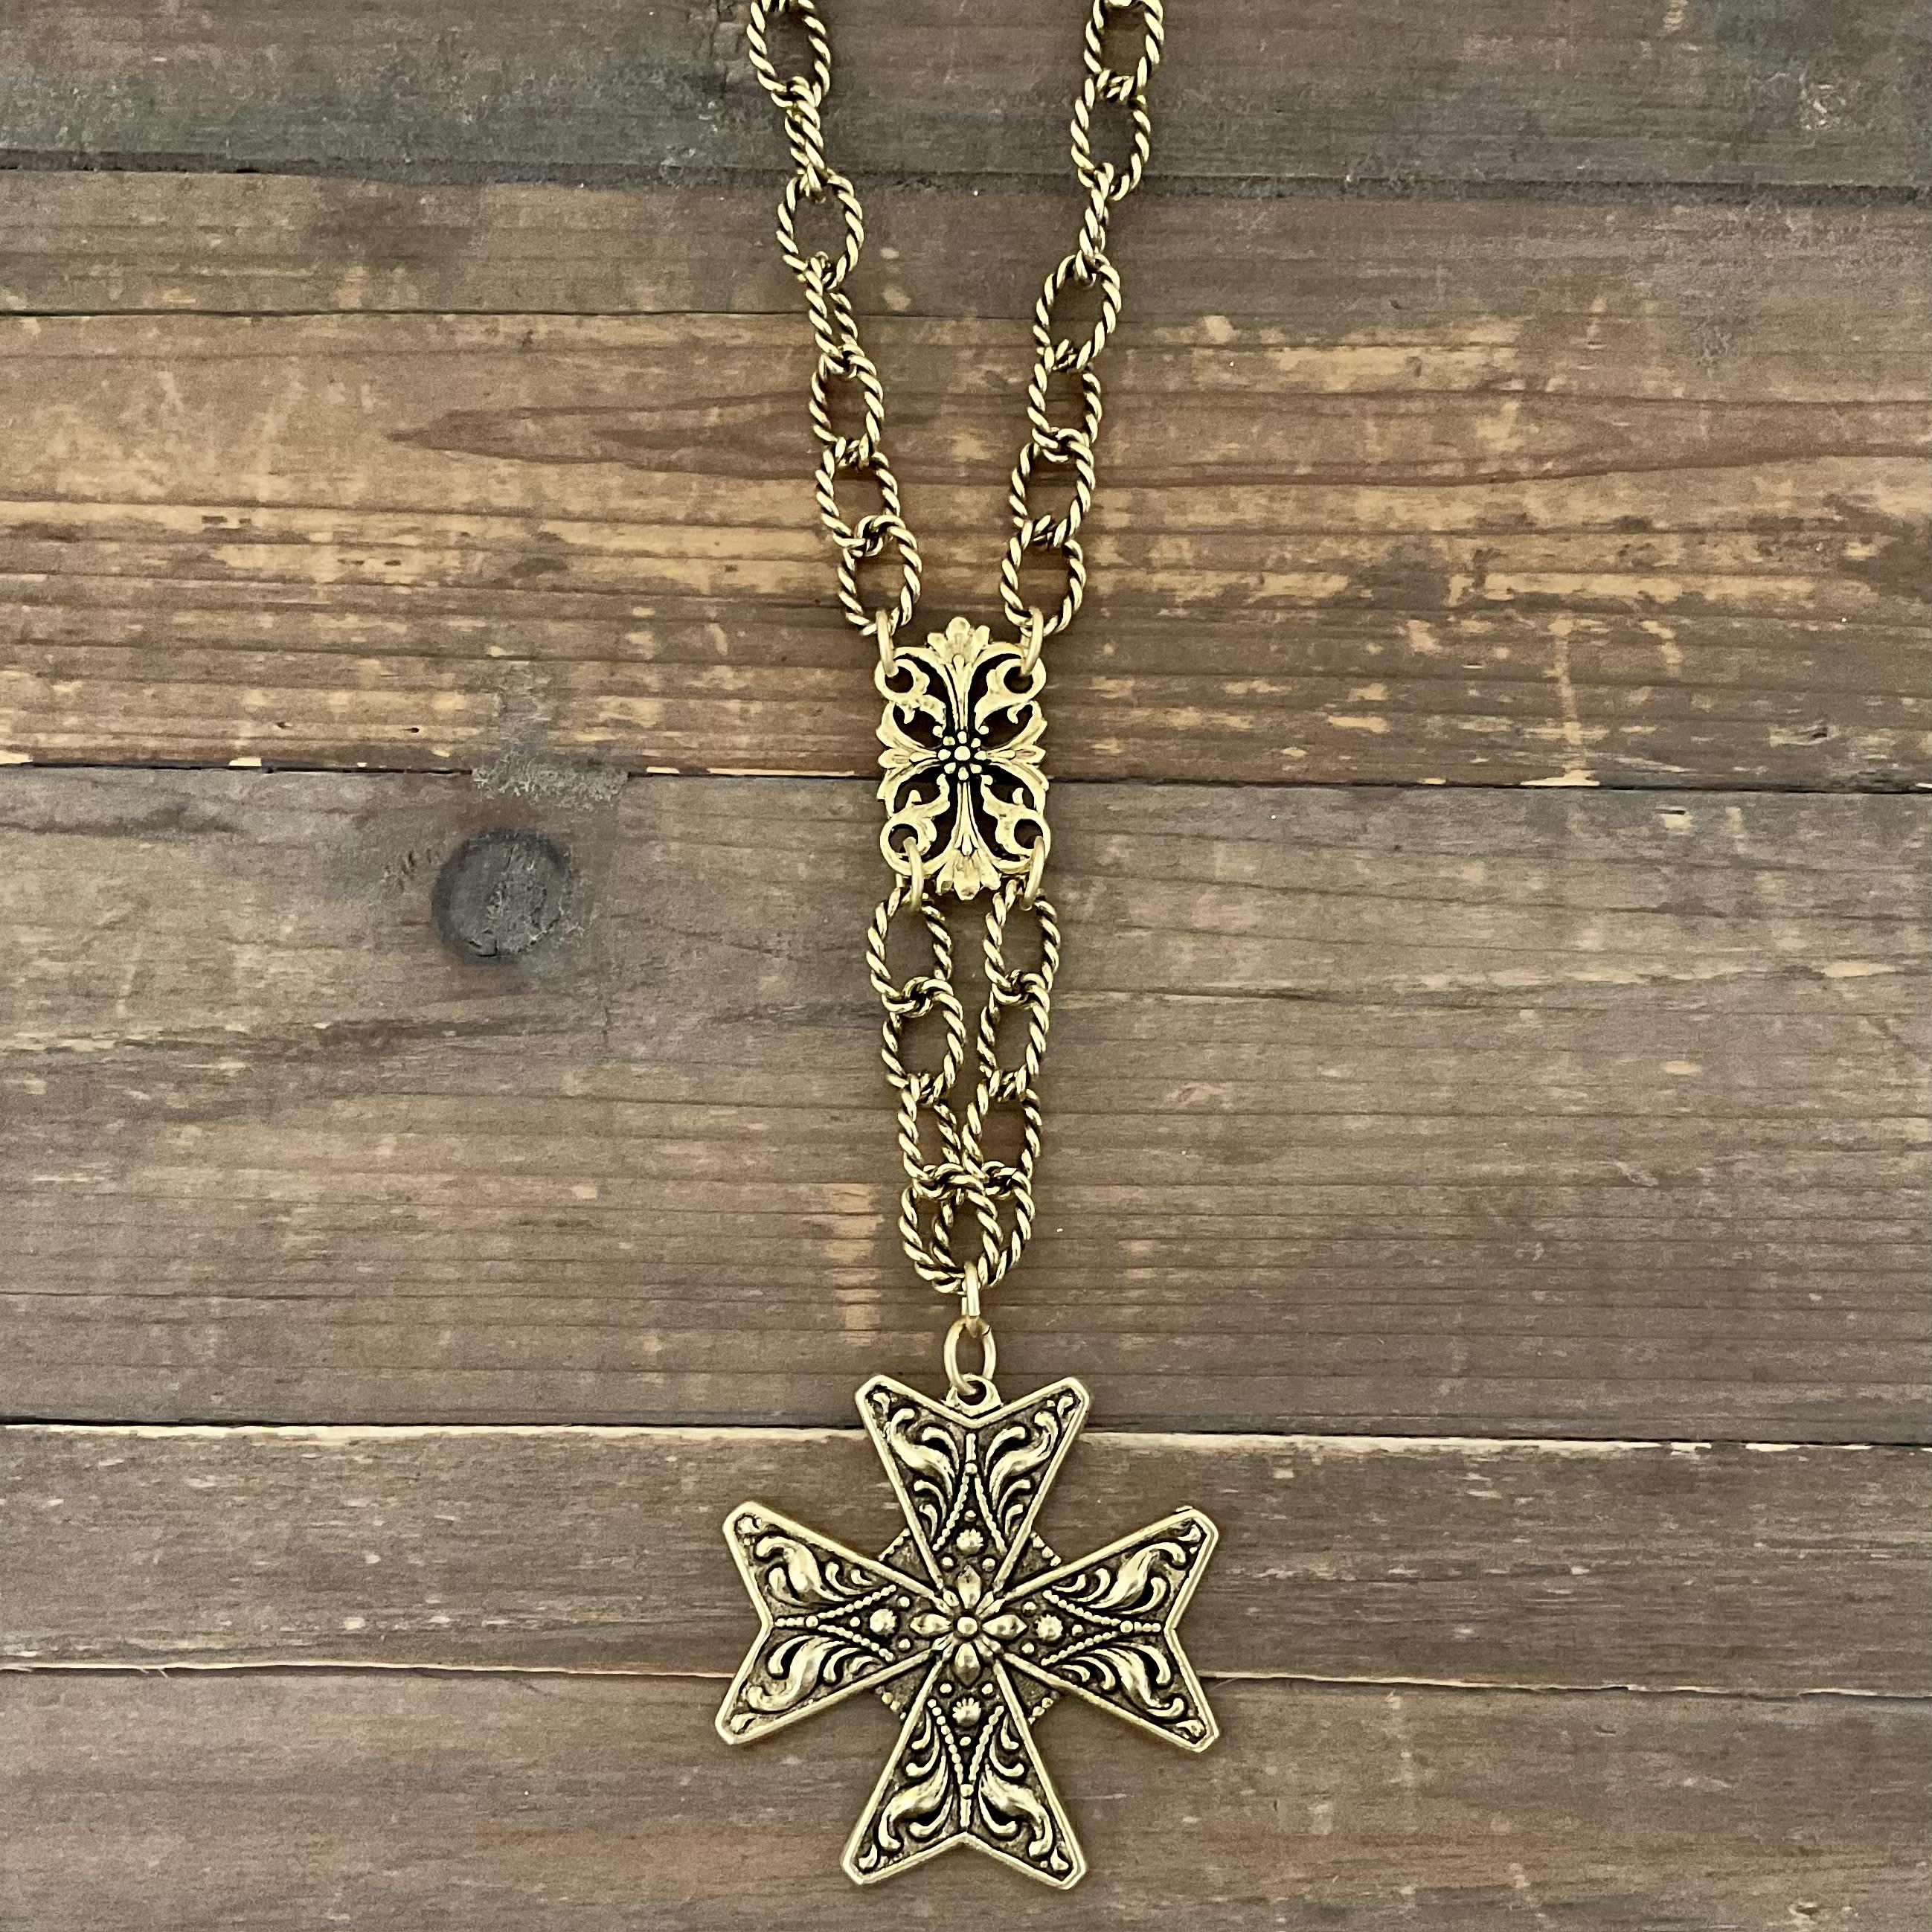 Gold Plated 36" Chain with Vintage Cross Pendant